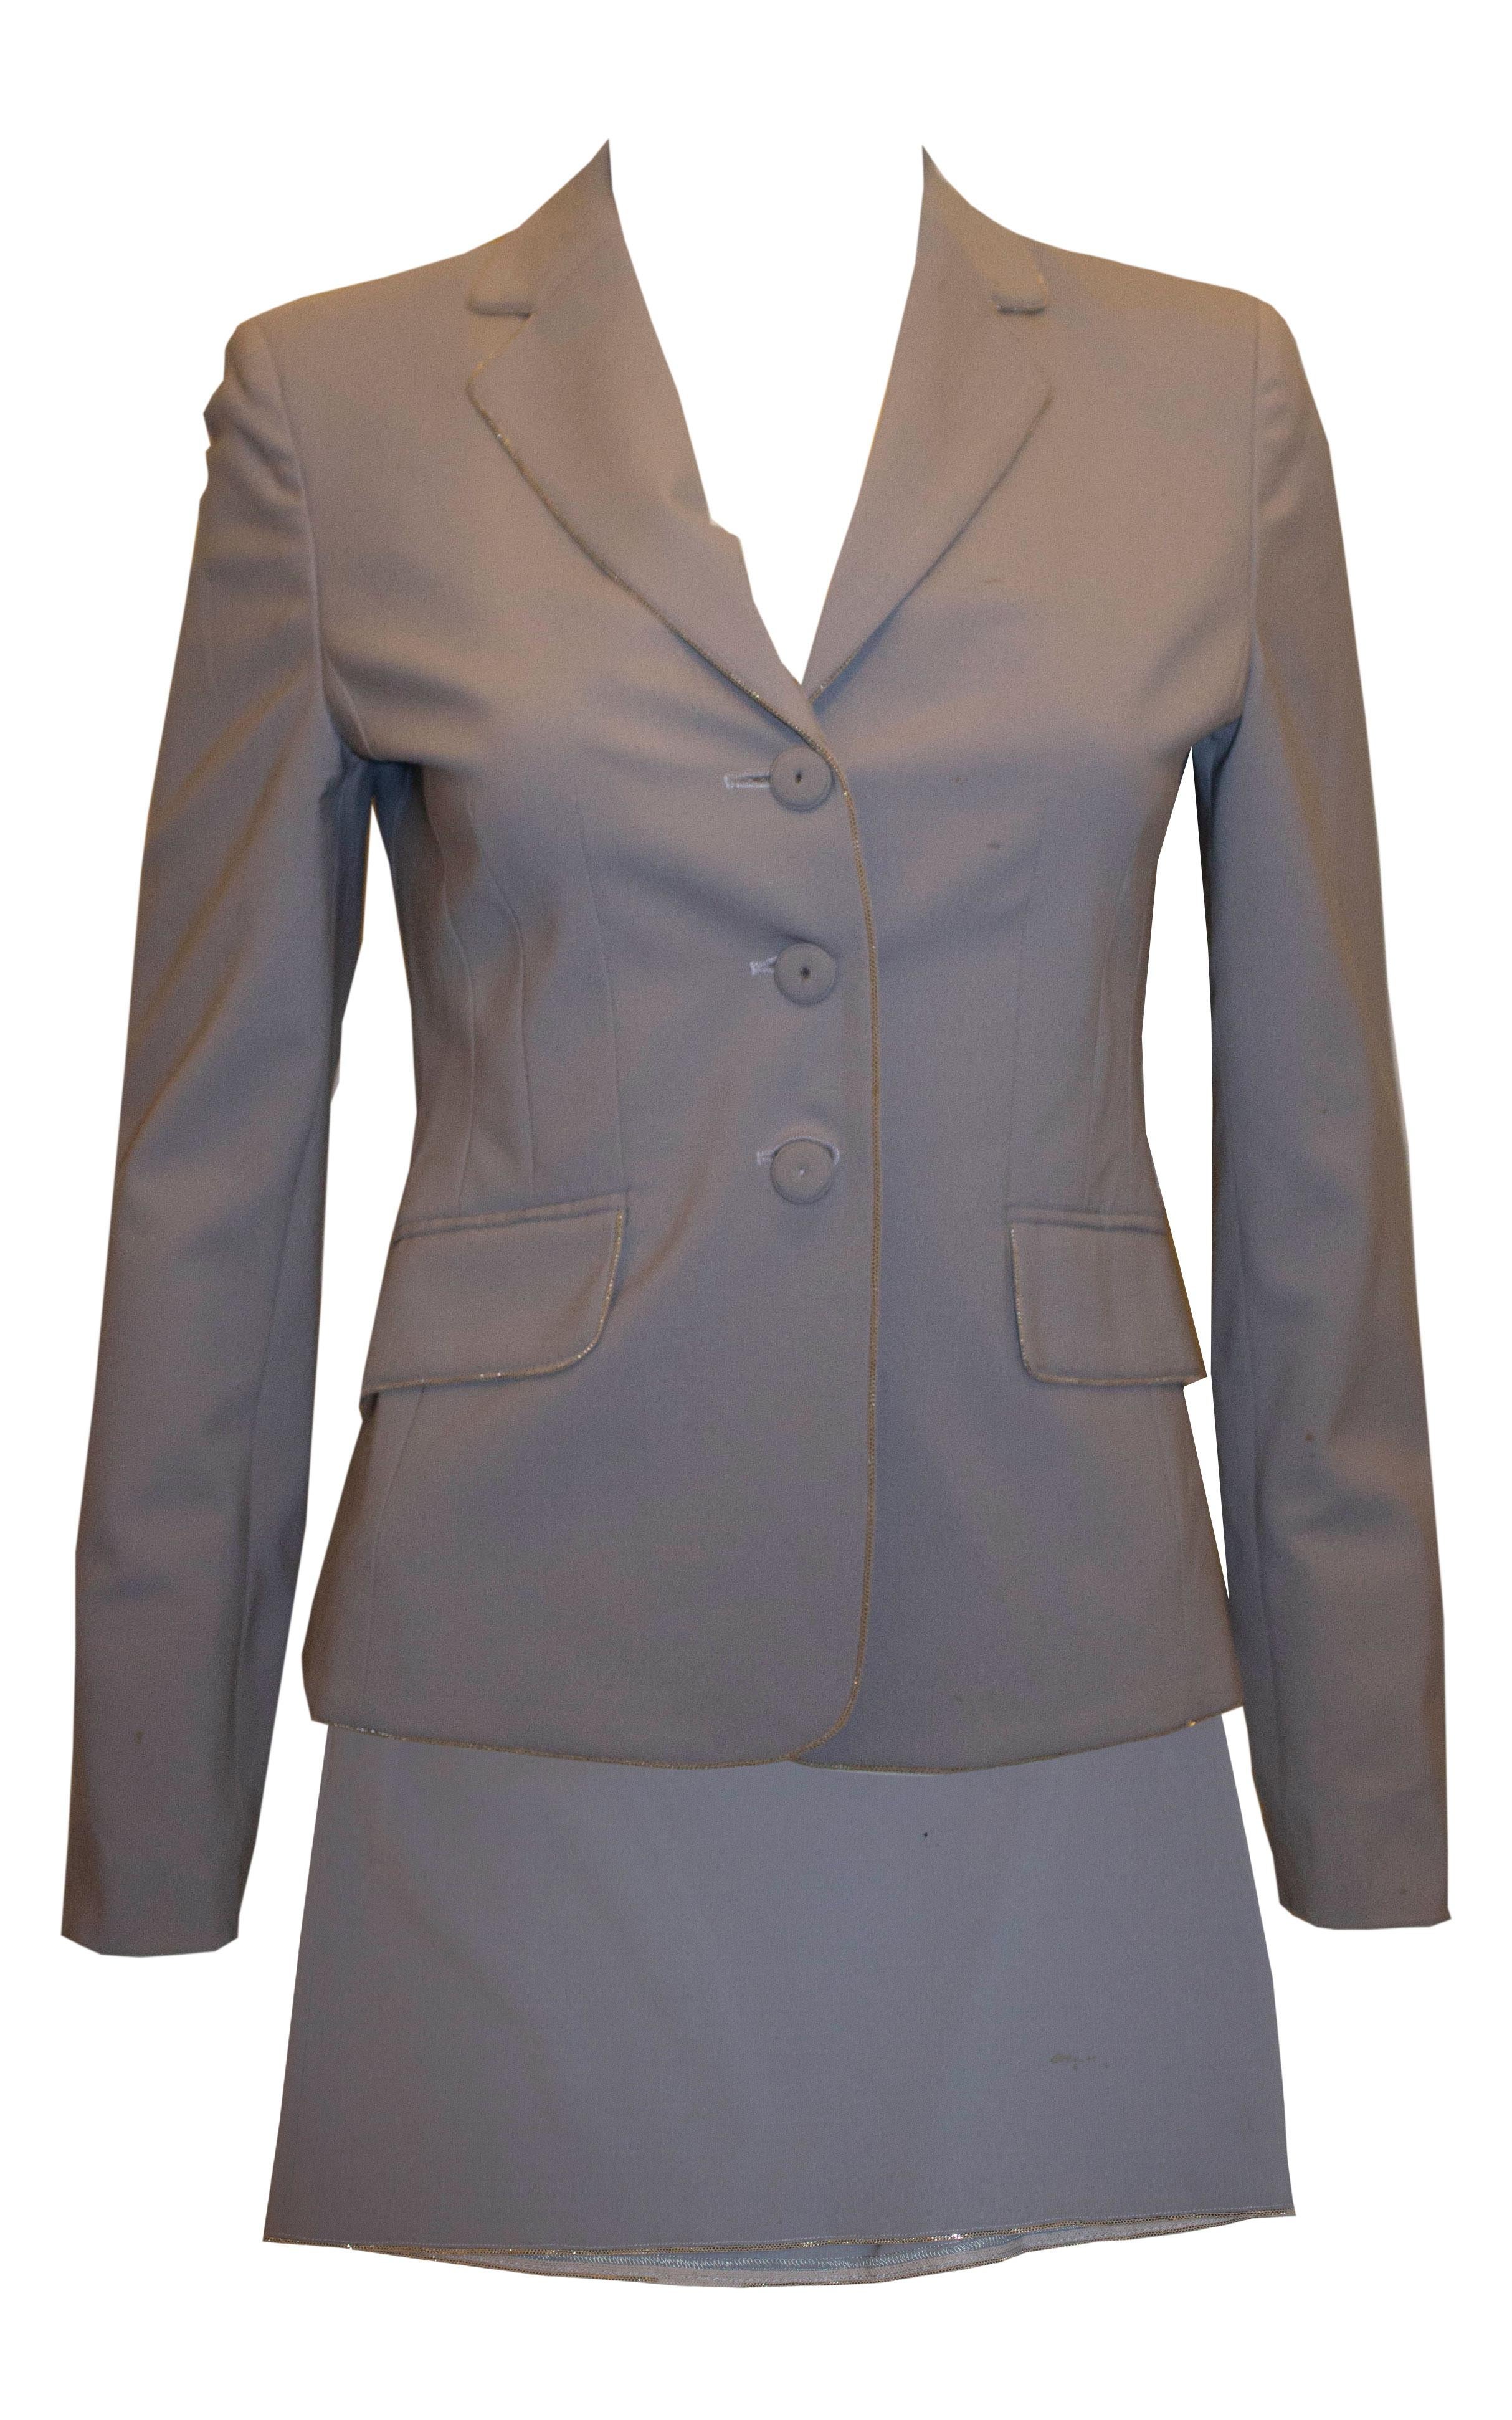 Moschino Sky Blue Skirt Suit In Good Condition For Sale In London, GB